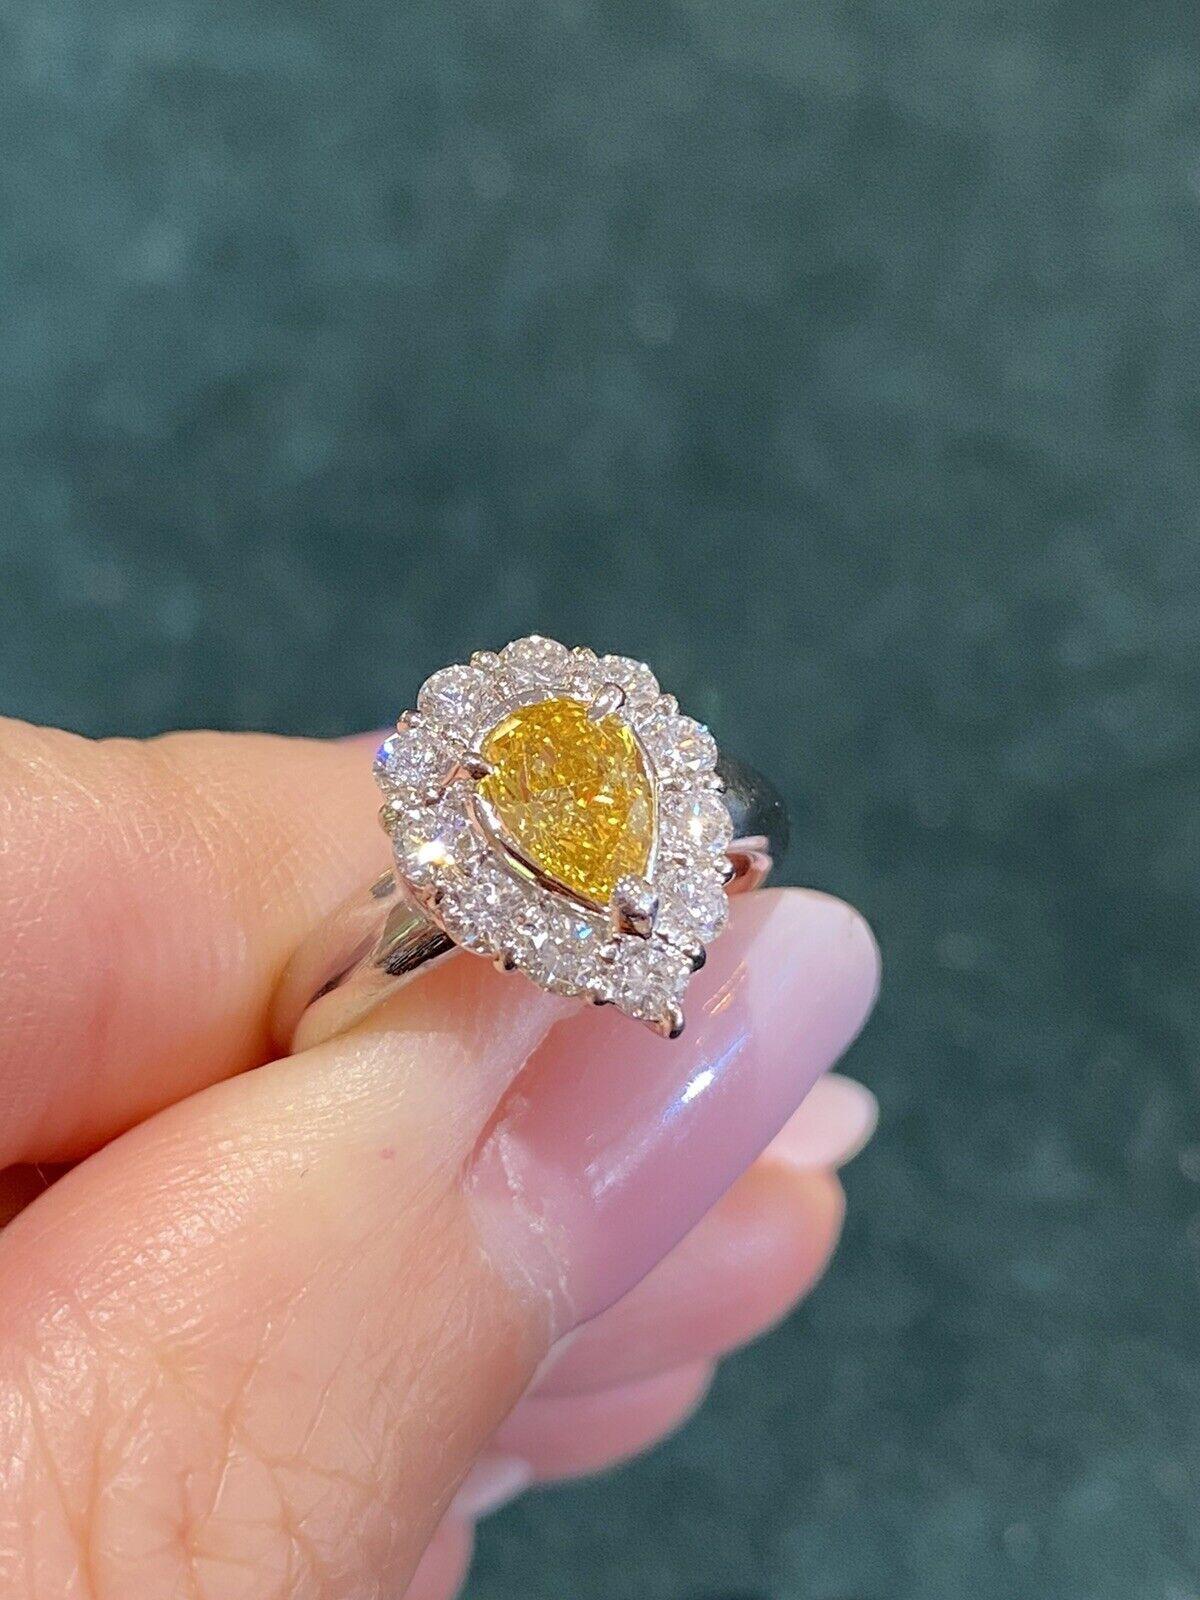 Pear Shape GIA Fancy Intense Orange-Yellow Diamond Ring in Platinum In Excellent Condition For Sale In La Jolla, CA